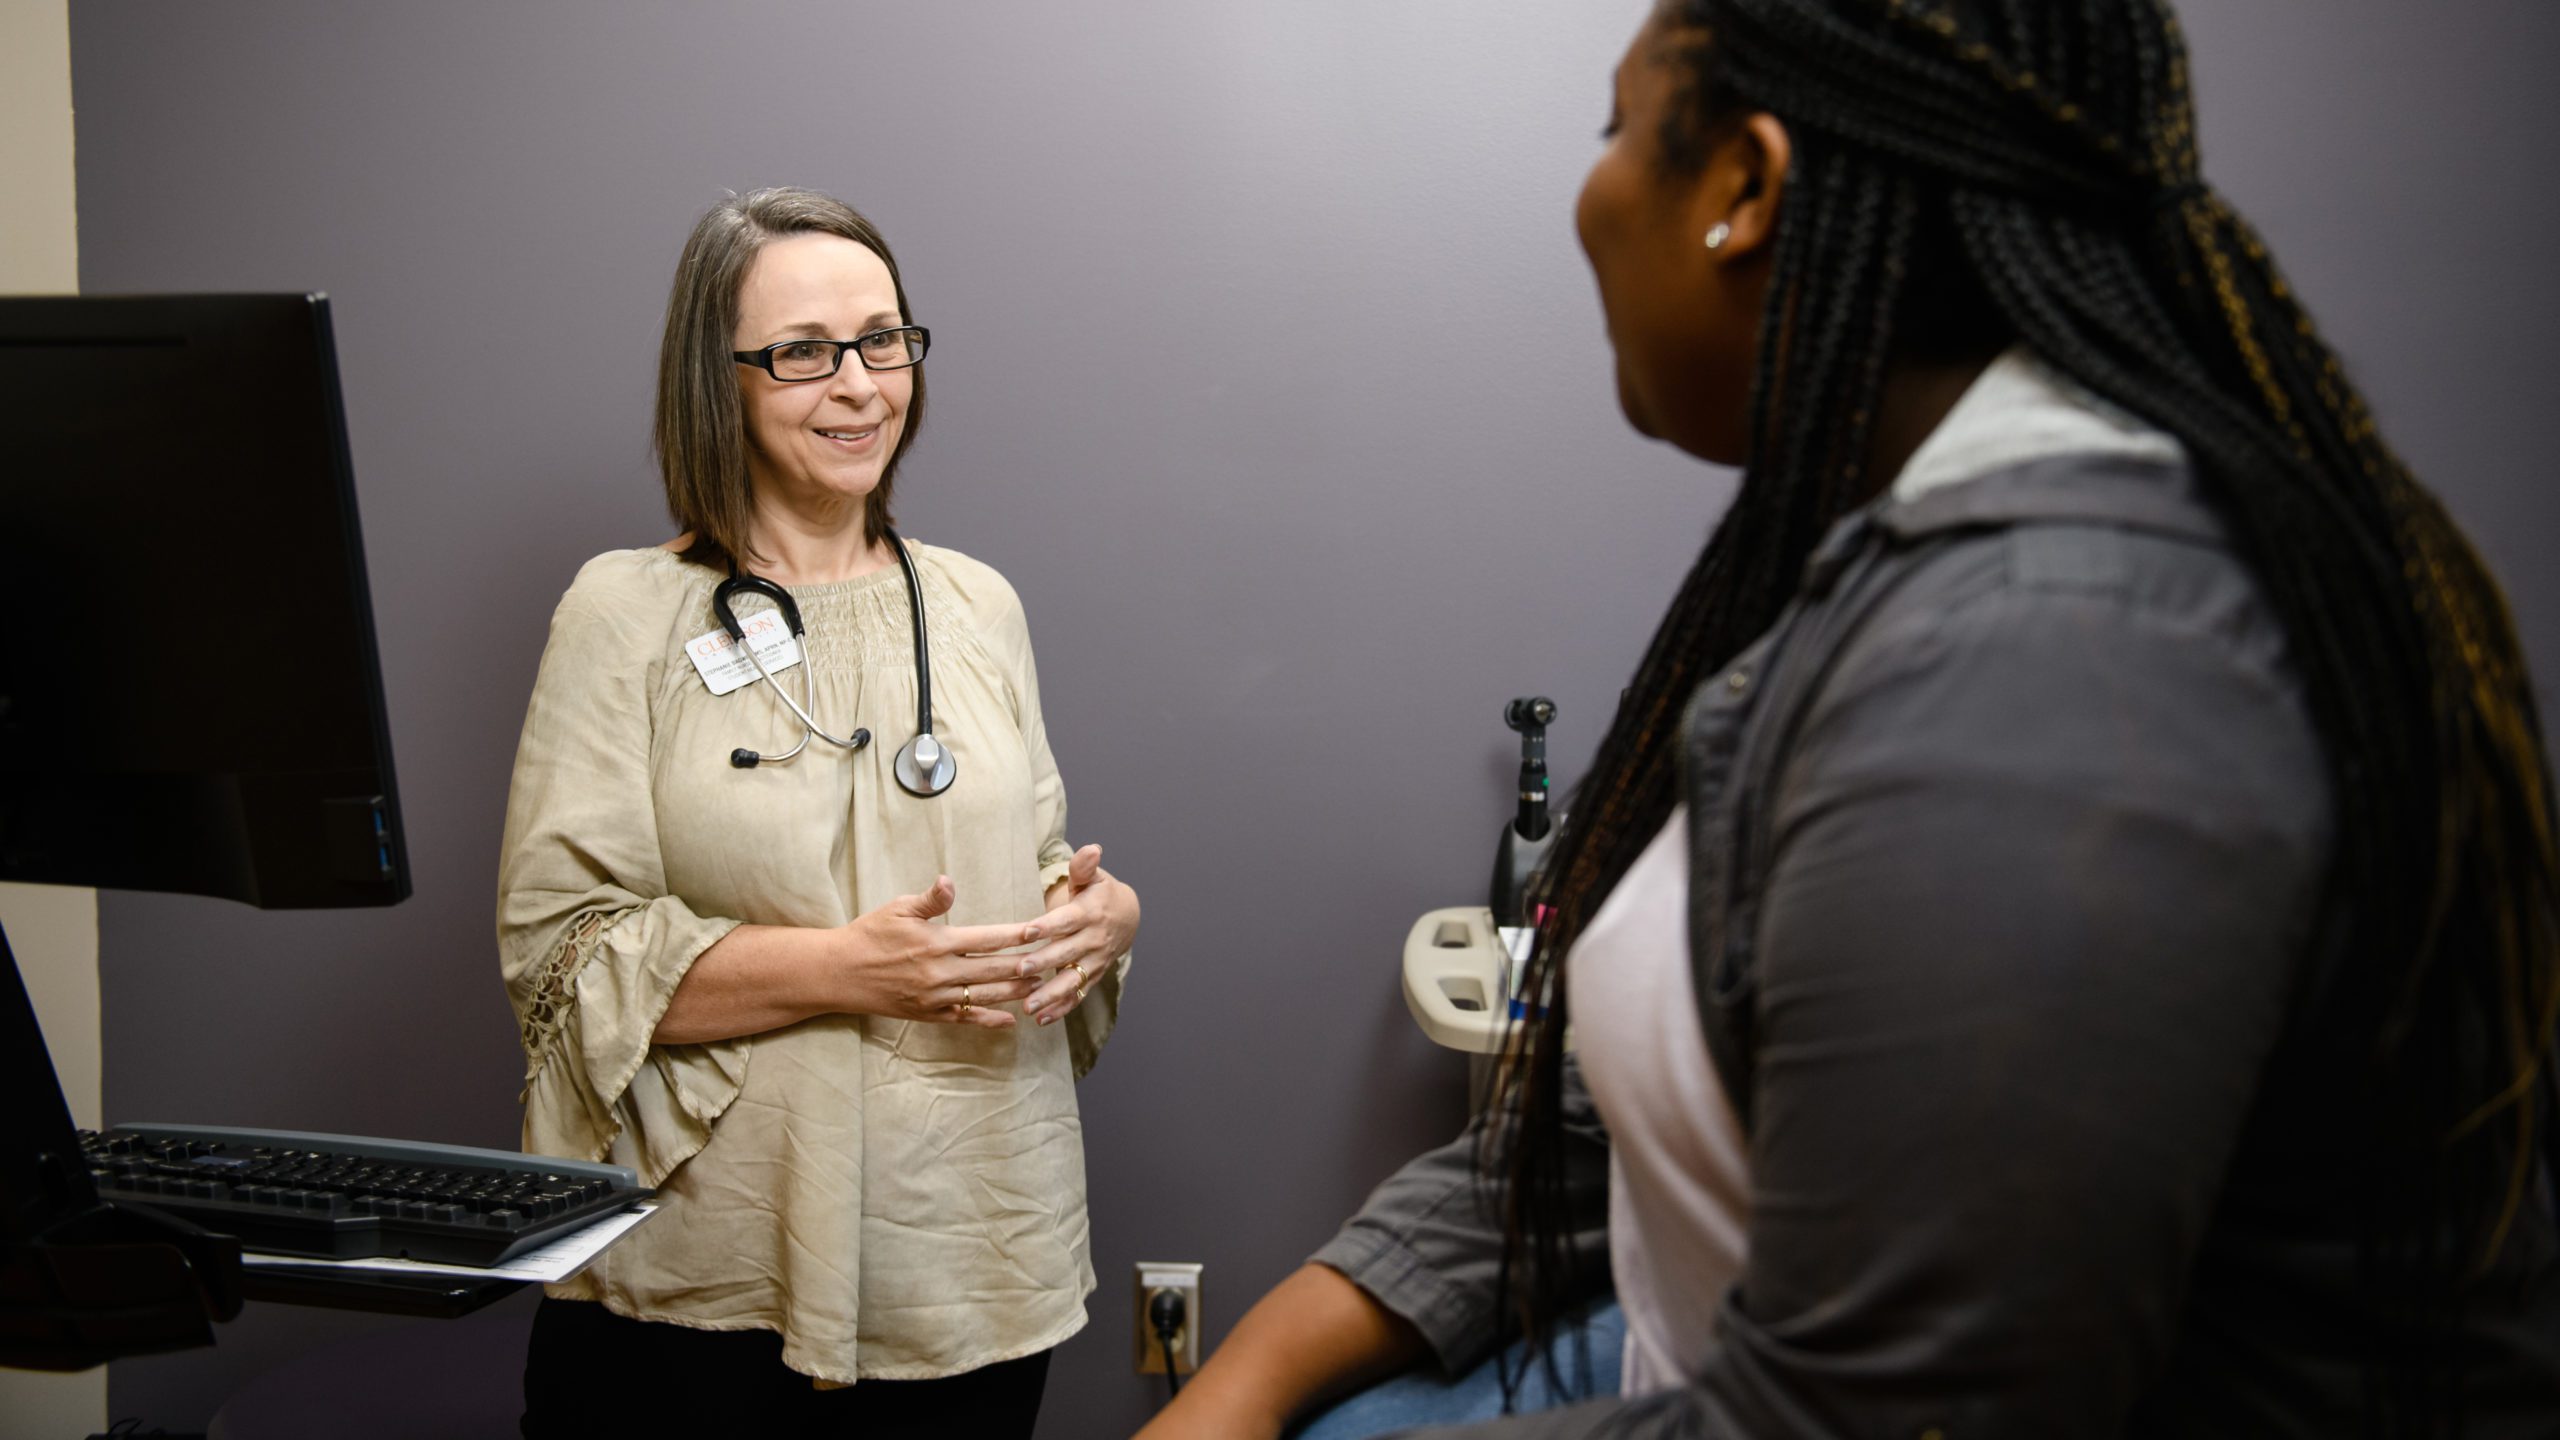 Stephanie Bagwell serves as a nurse practitioner at Redfern Health Center